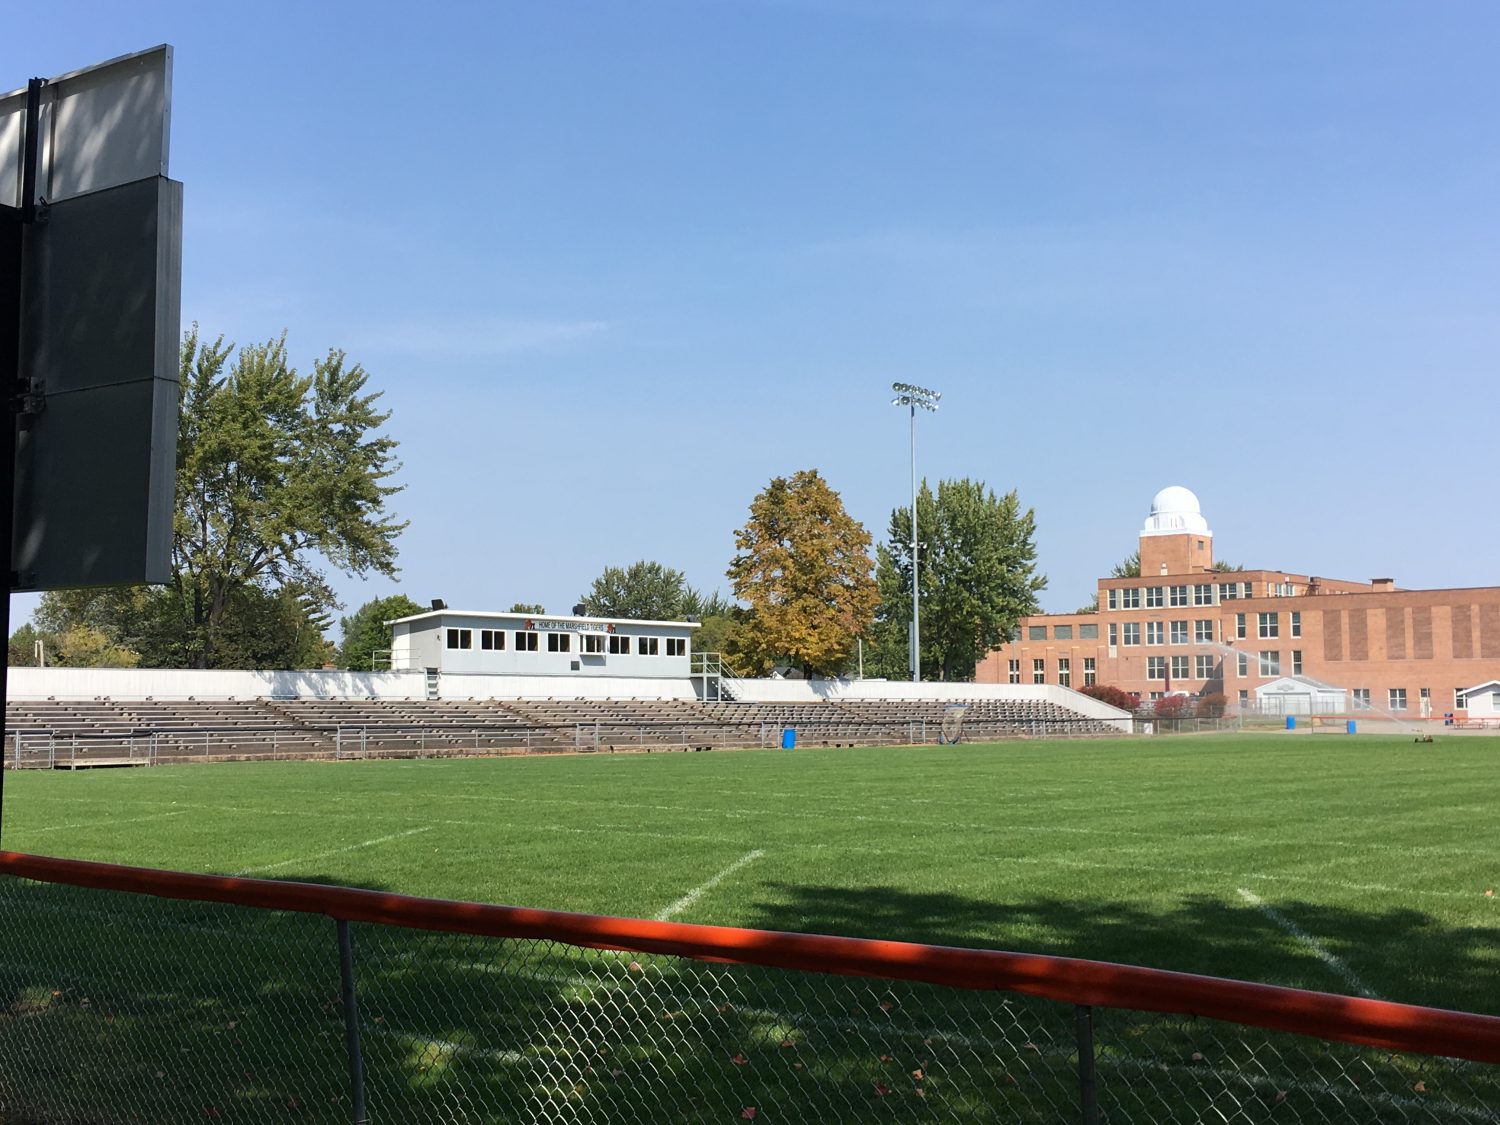 A capital campaign for improvements and development of athletic facilities in the School District of Marshfield will begin in December.